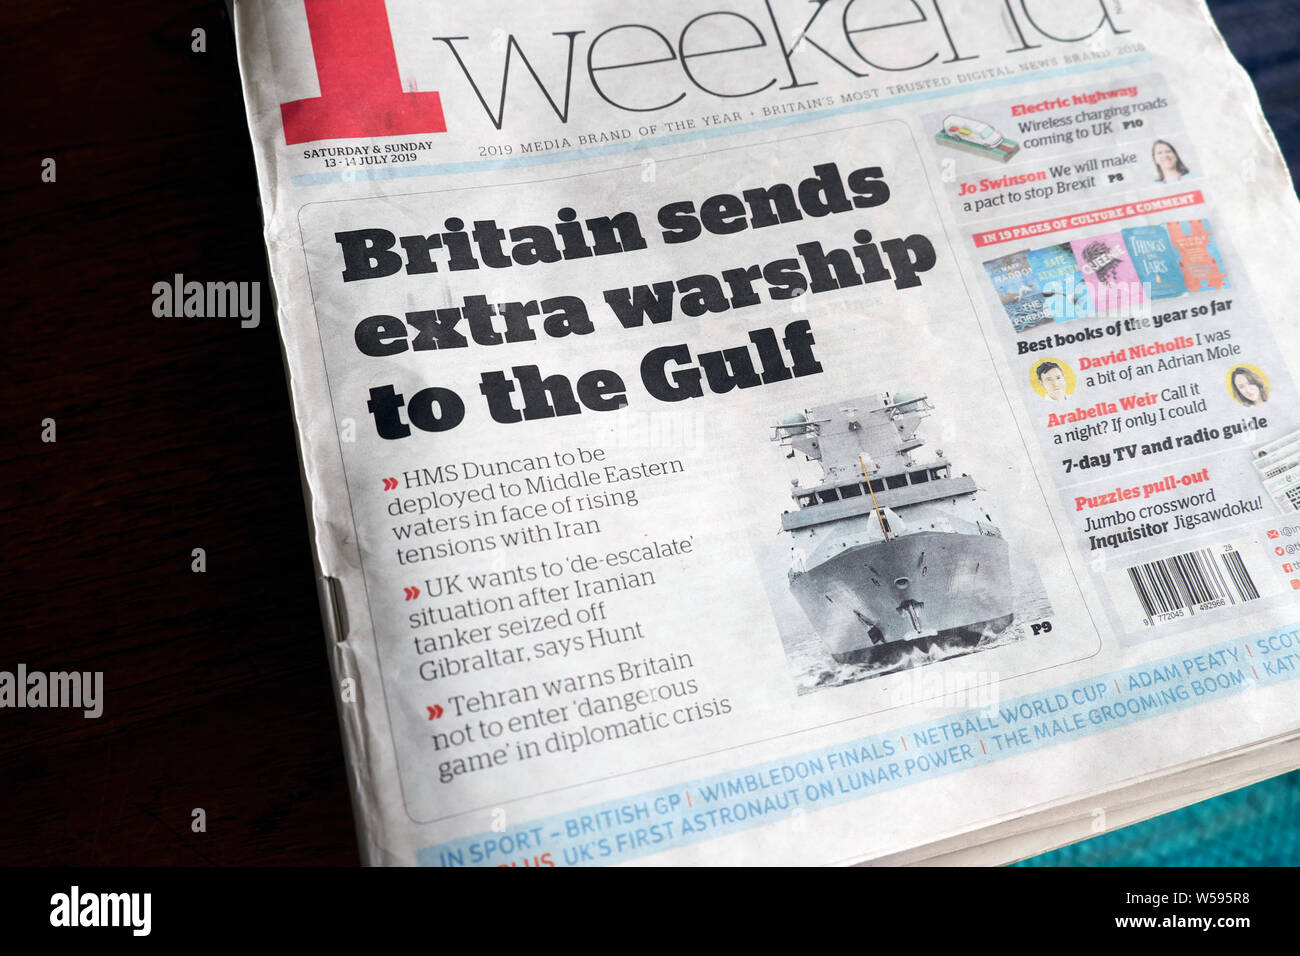 'Britain sends extra warship to the Gulf' i newspaper headline on front page London England UK Stock Photo